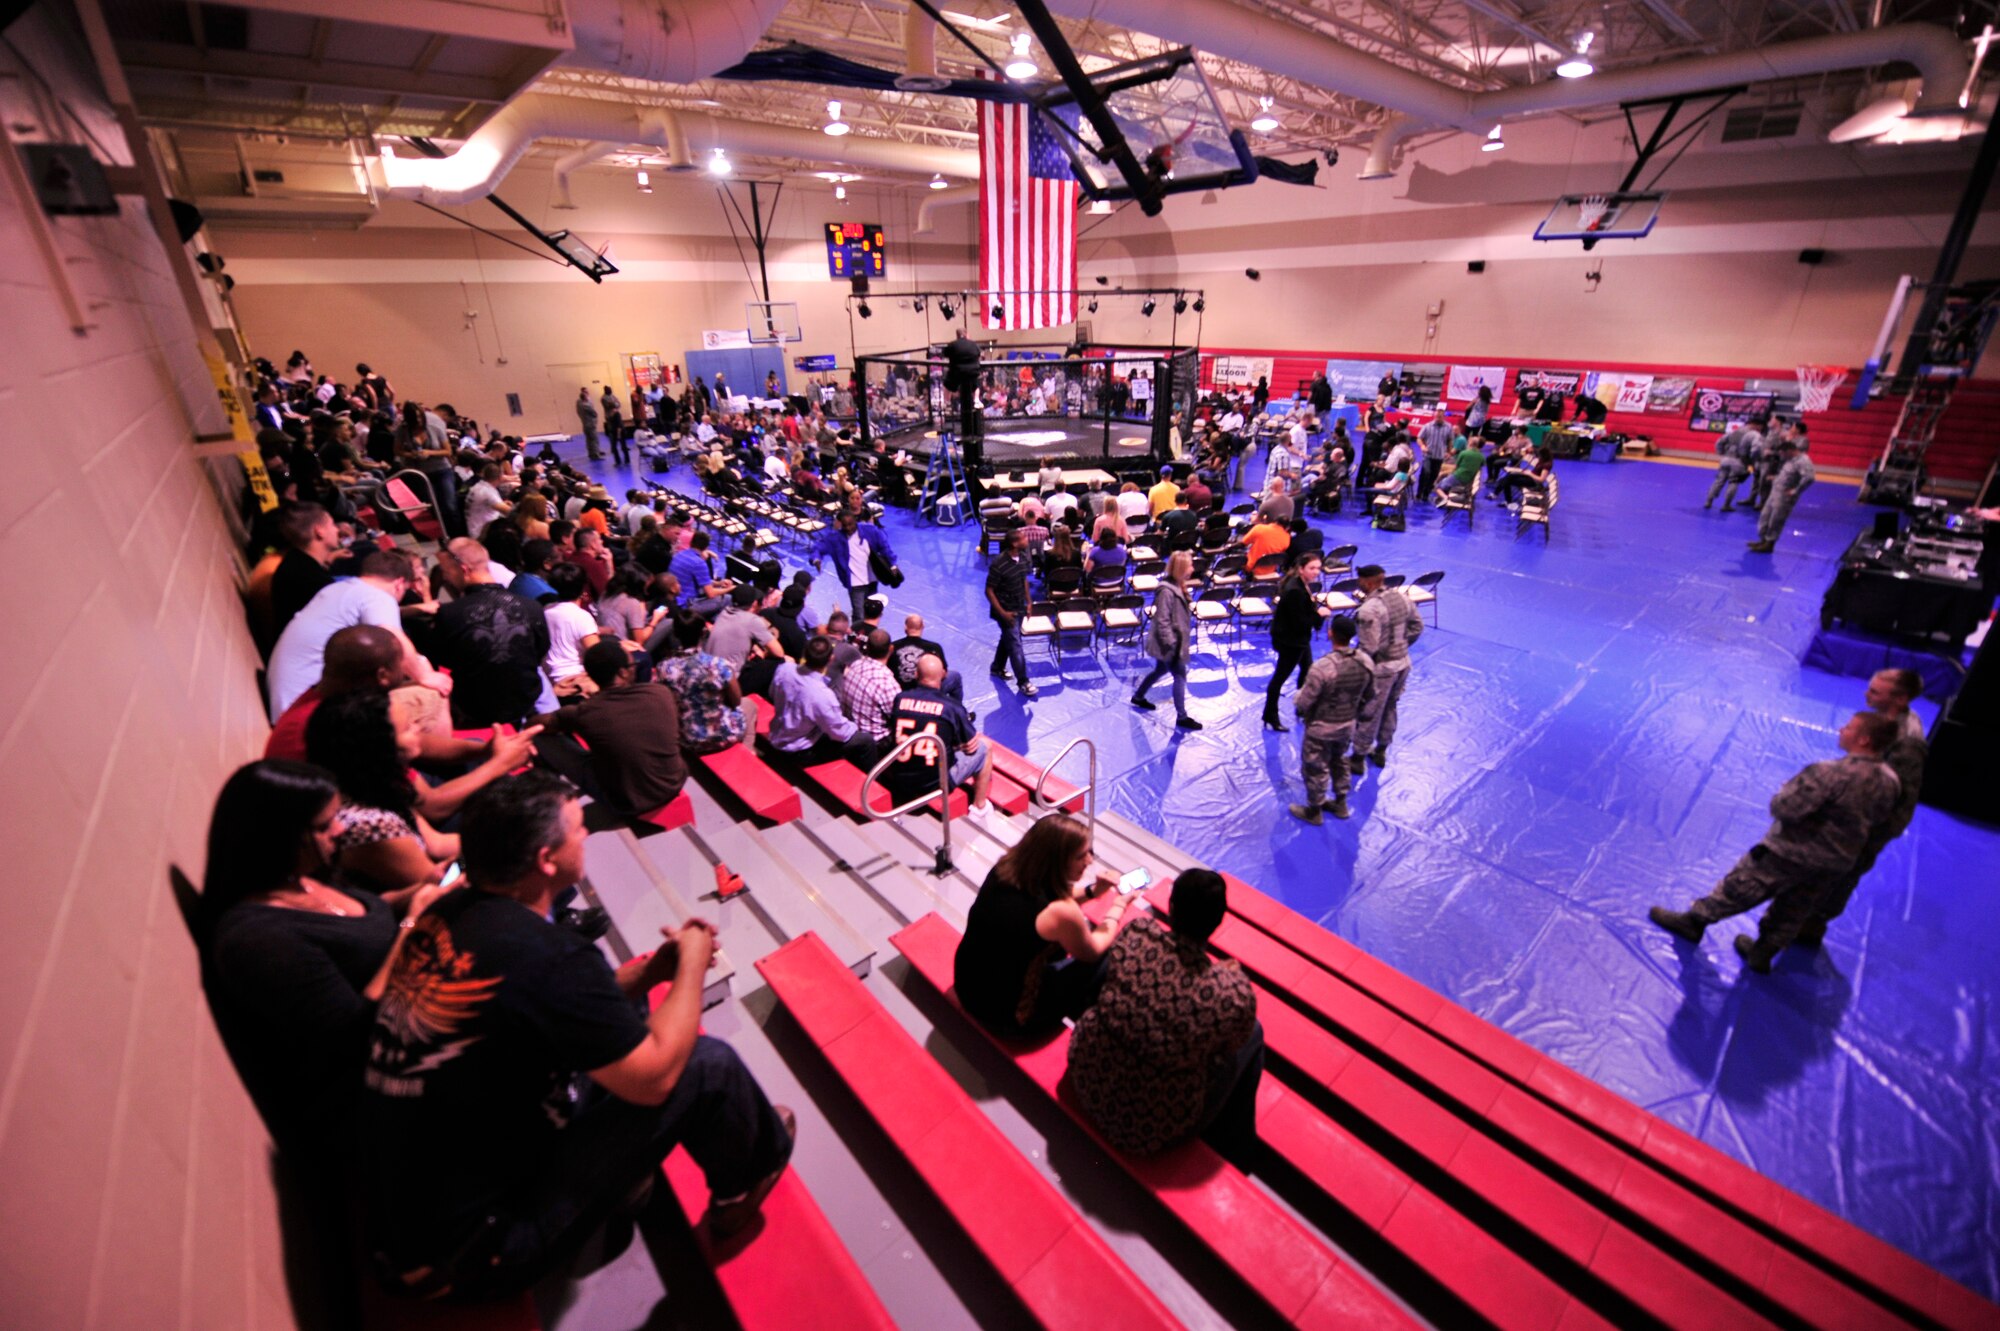 Team Shaw members gather at the fitness center for the mixed marital arts cage fight, Shaw Air Force Base, S.C., Oct. 12, 2012.  18 fighters came to Shaw for the event and were paired together for 9 fights.(U.S. Air Force photo by Airman Nicole Sikorski/Released)